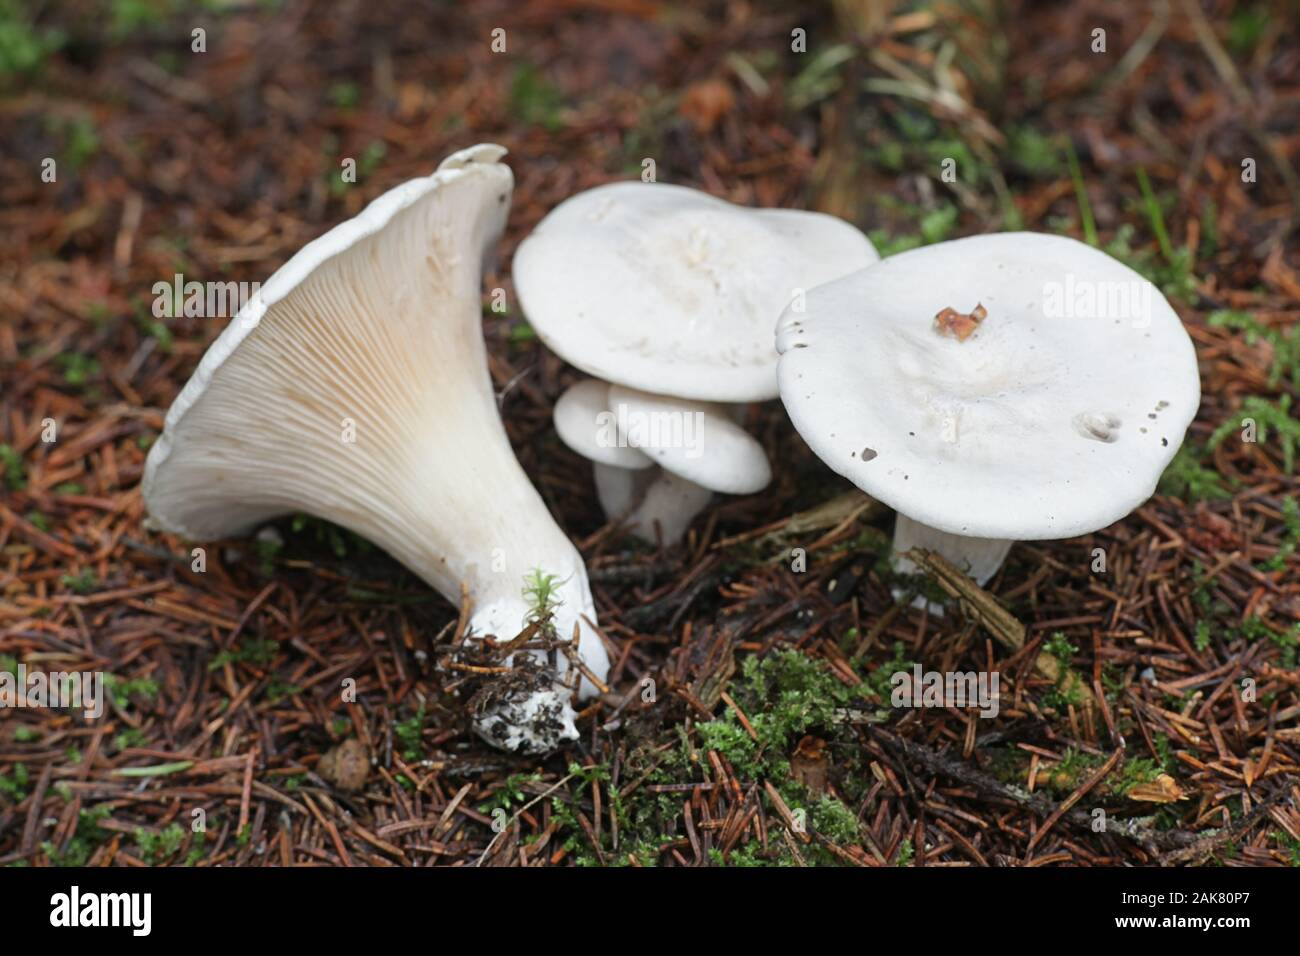 Clitopilus prunulus, known as the miller or the sweetbread mushroom, wild mushrooms from Finland Stock Photo